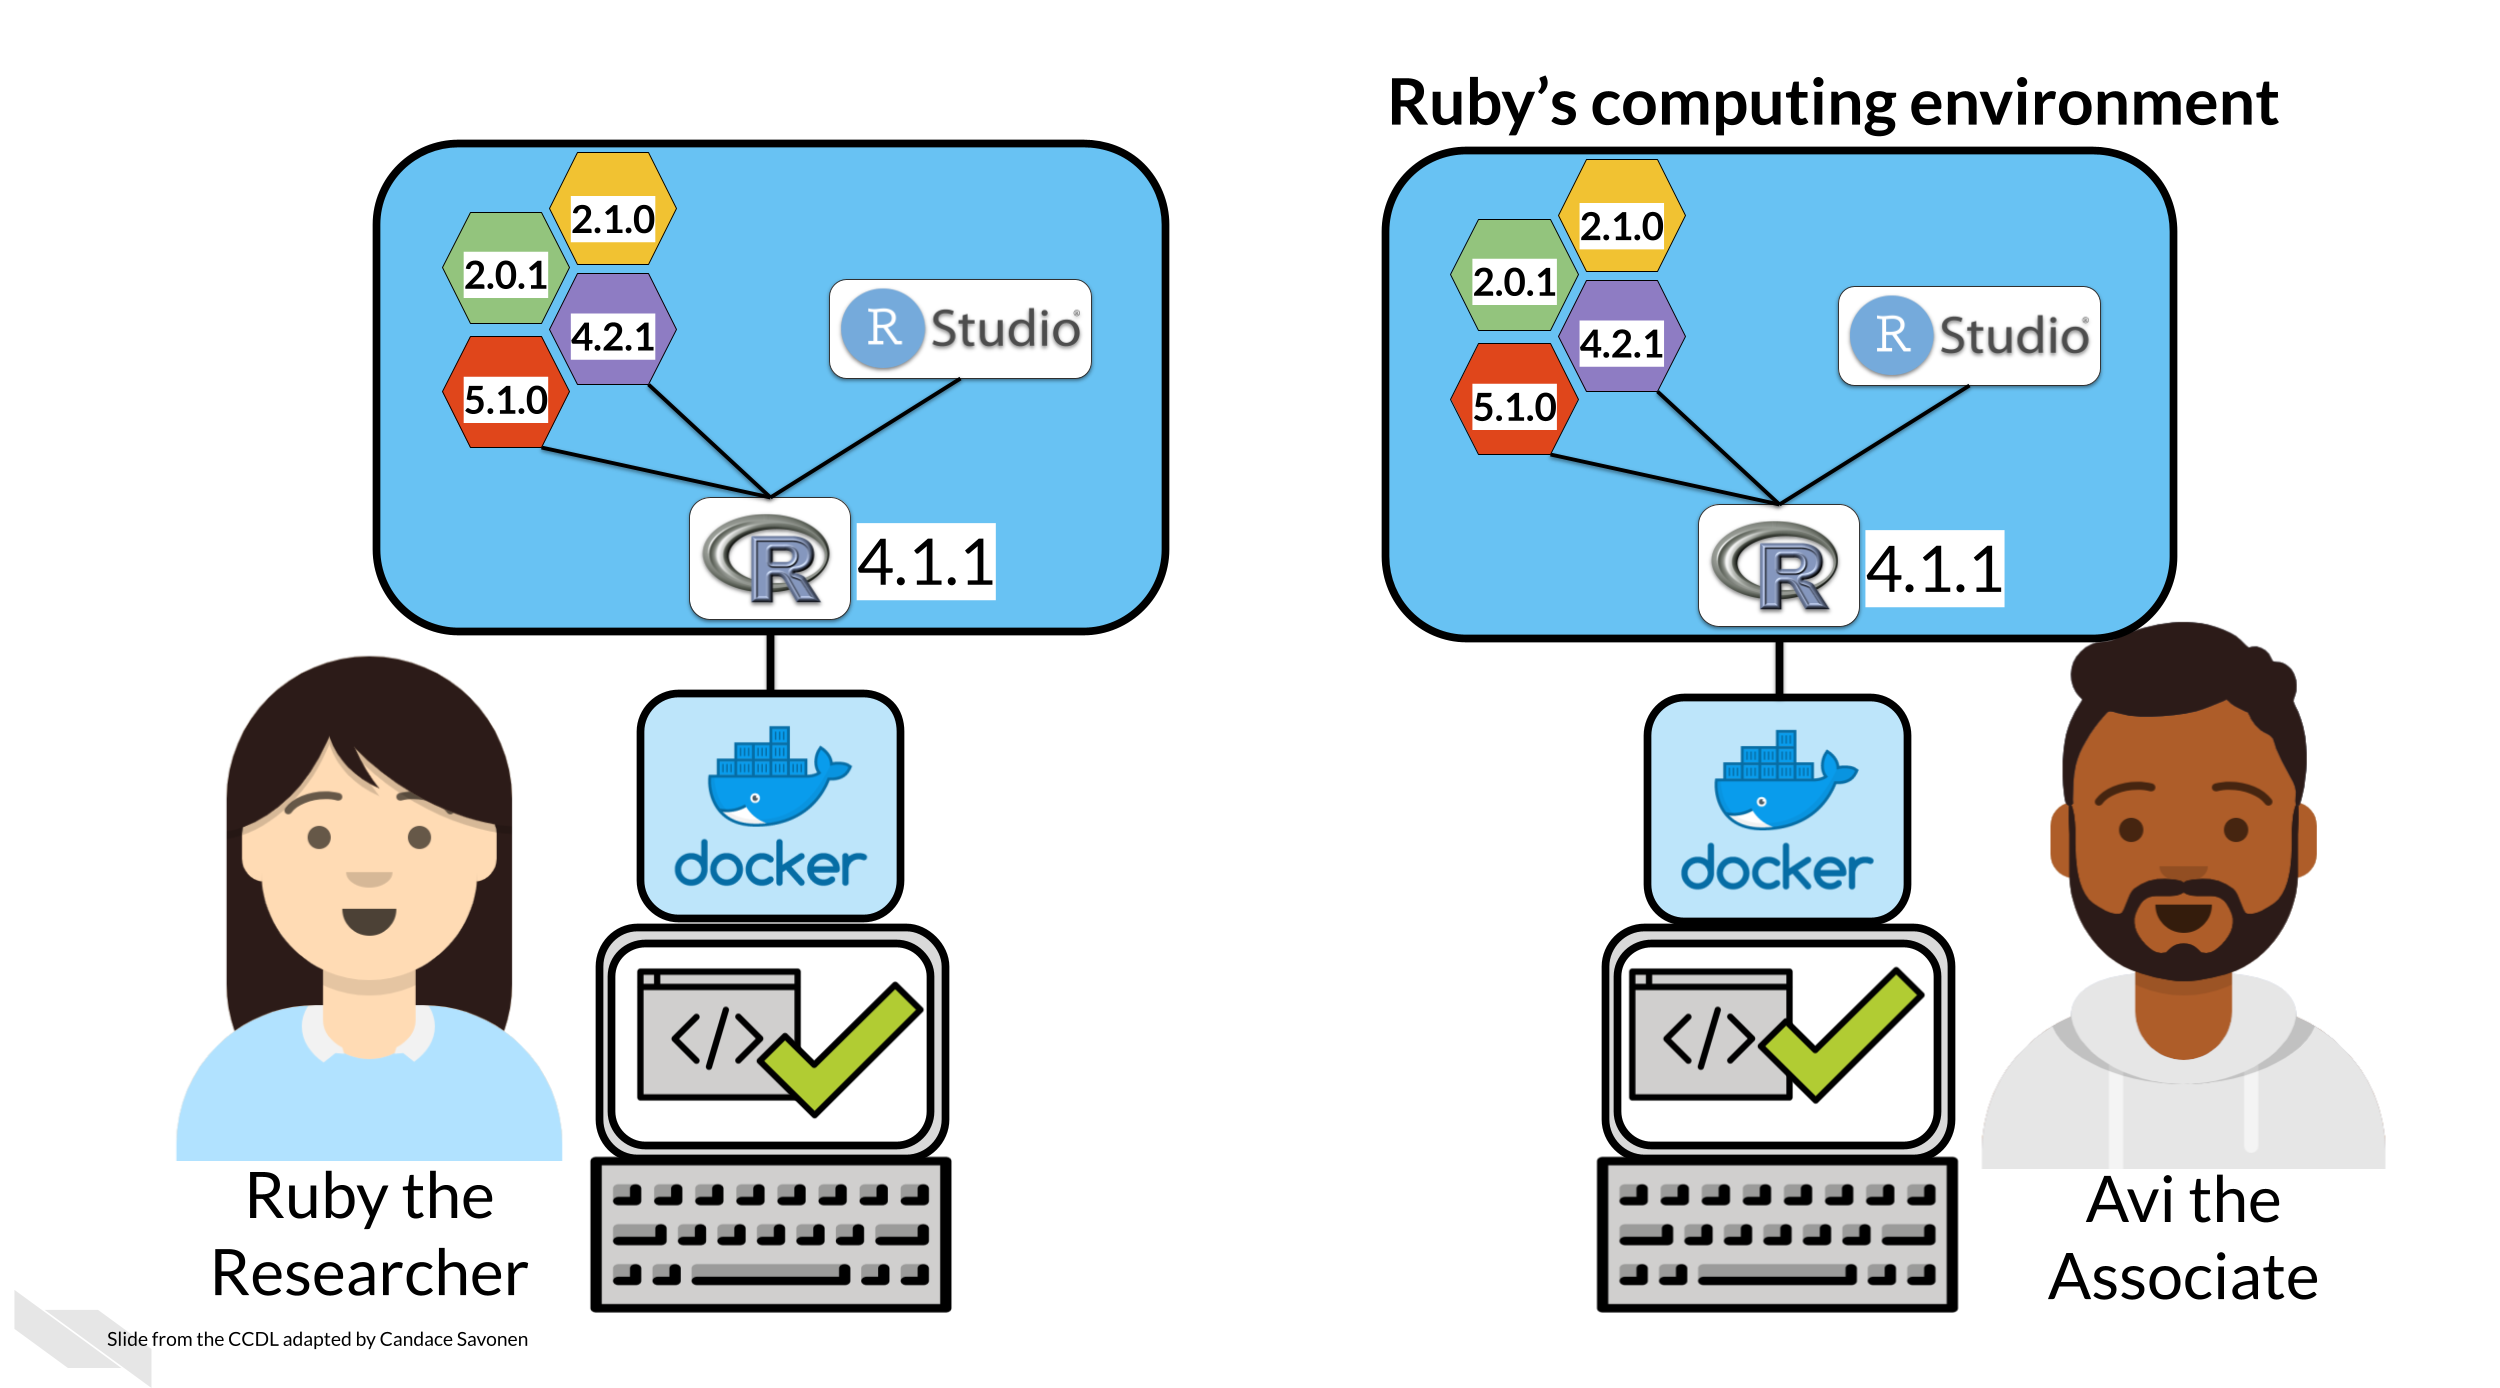 Ruby and Avi are using Docker and can ensure that they are using the exact same computing environment as they are working on Ruby’s analysis.